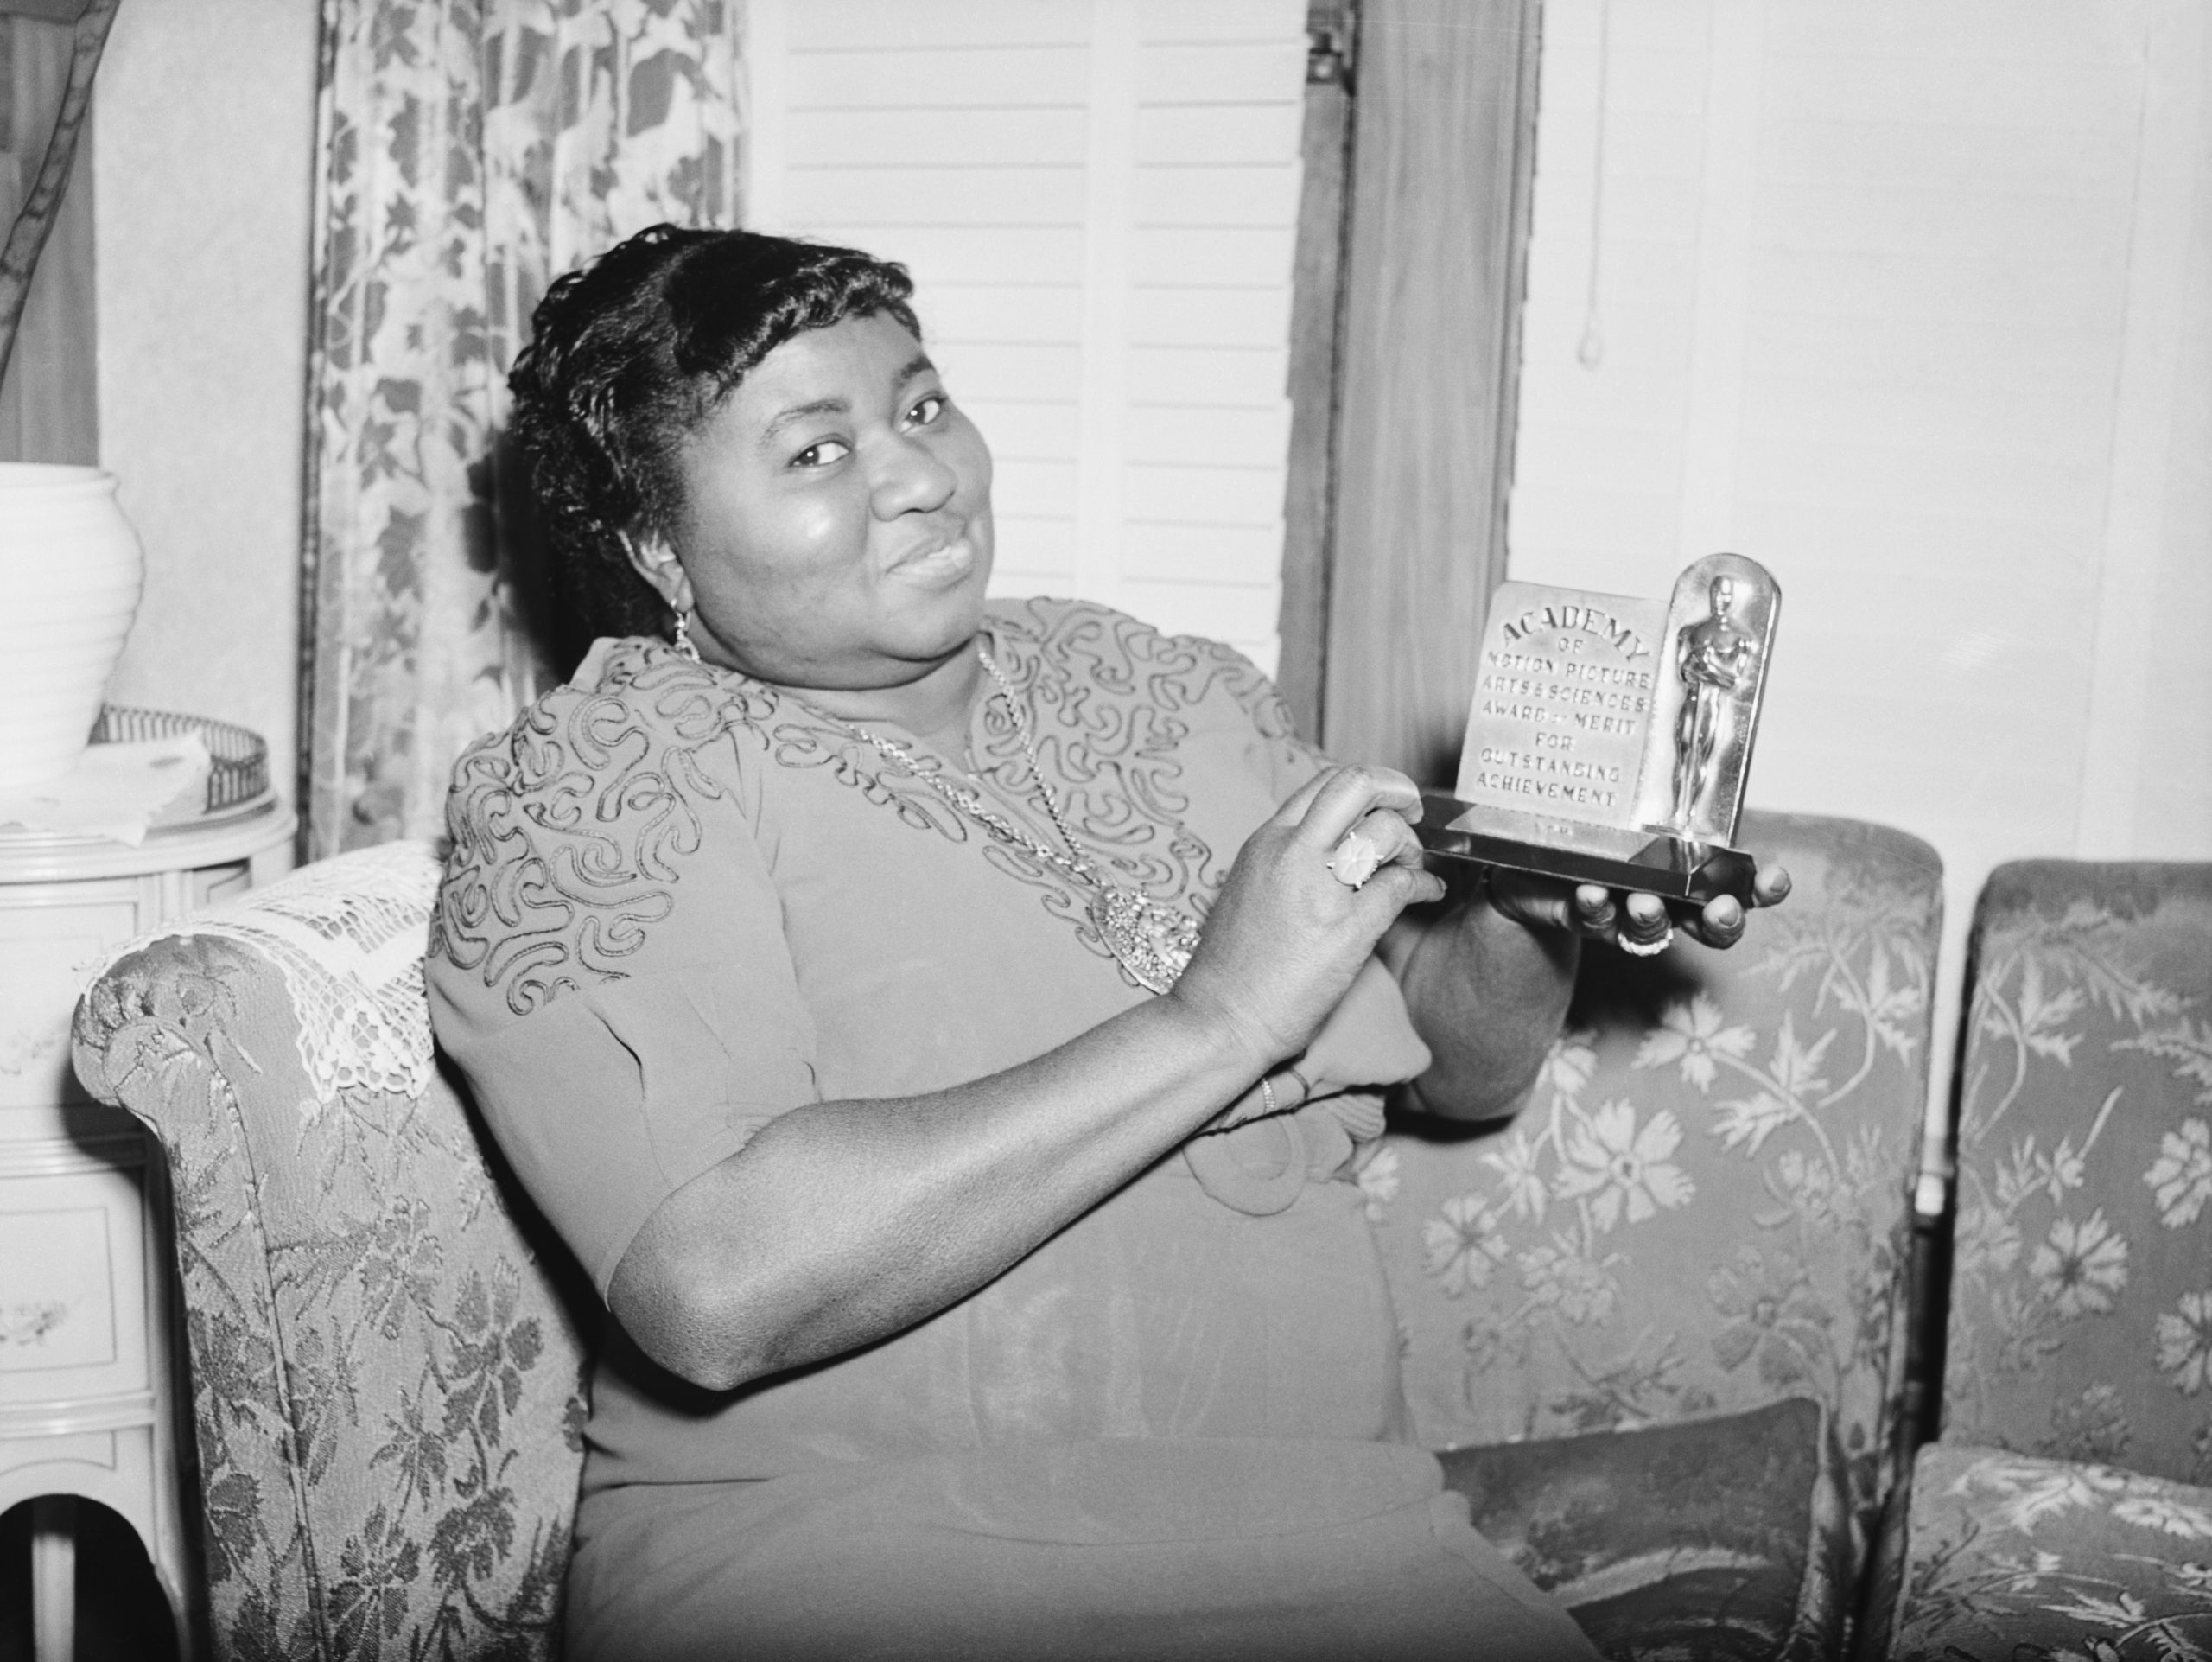 Hattie McDaniel’s Lost Historic Oscar to Be Replaced by Academy